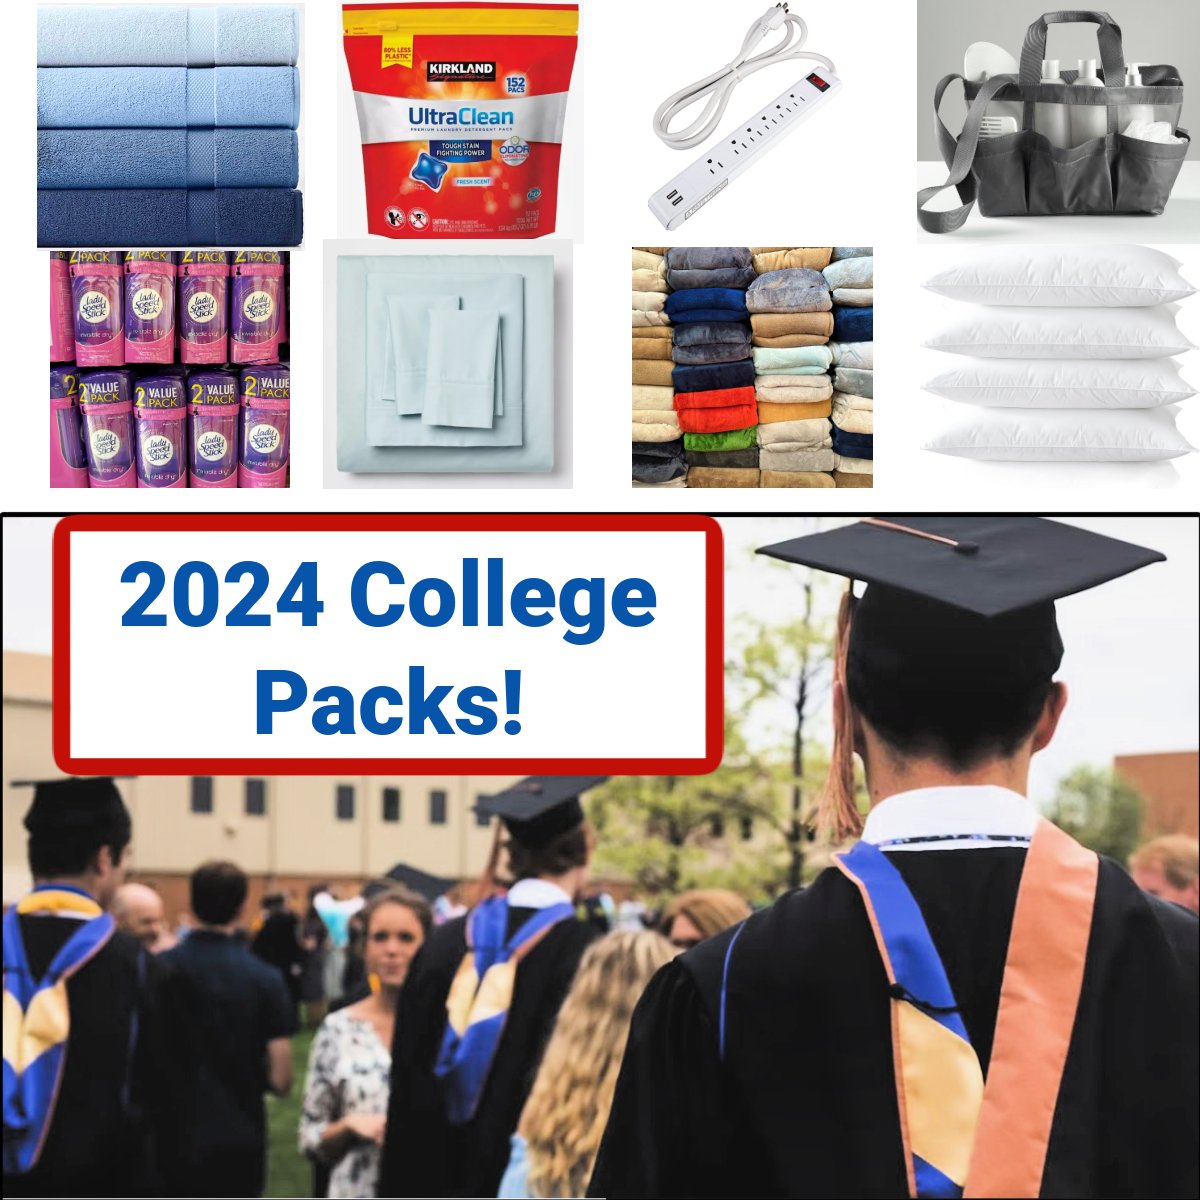 Packing for college is expensive, so we're filling laundry baskets for 100 needy #collegebound #HISD seniors. In each: new pillow, bedding, power strip, towel, shower caddy & hygiene items, school supplies, & more. Can you donate to help? ❤️bit.ly/49BGCAc
@TeamHISD #txed